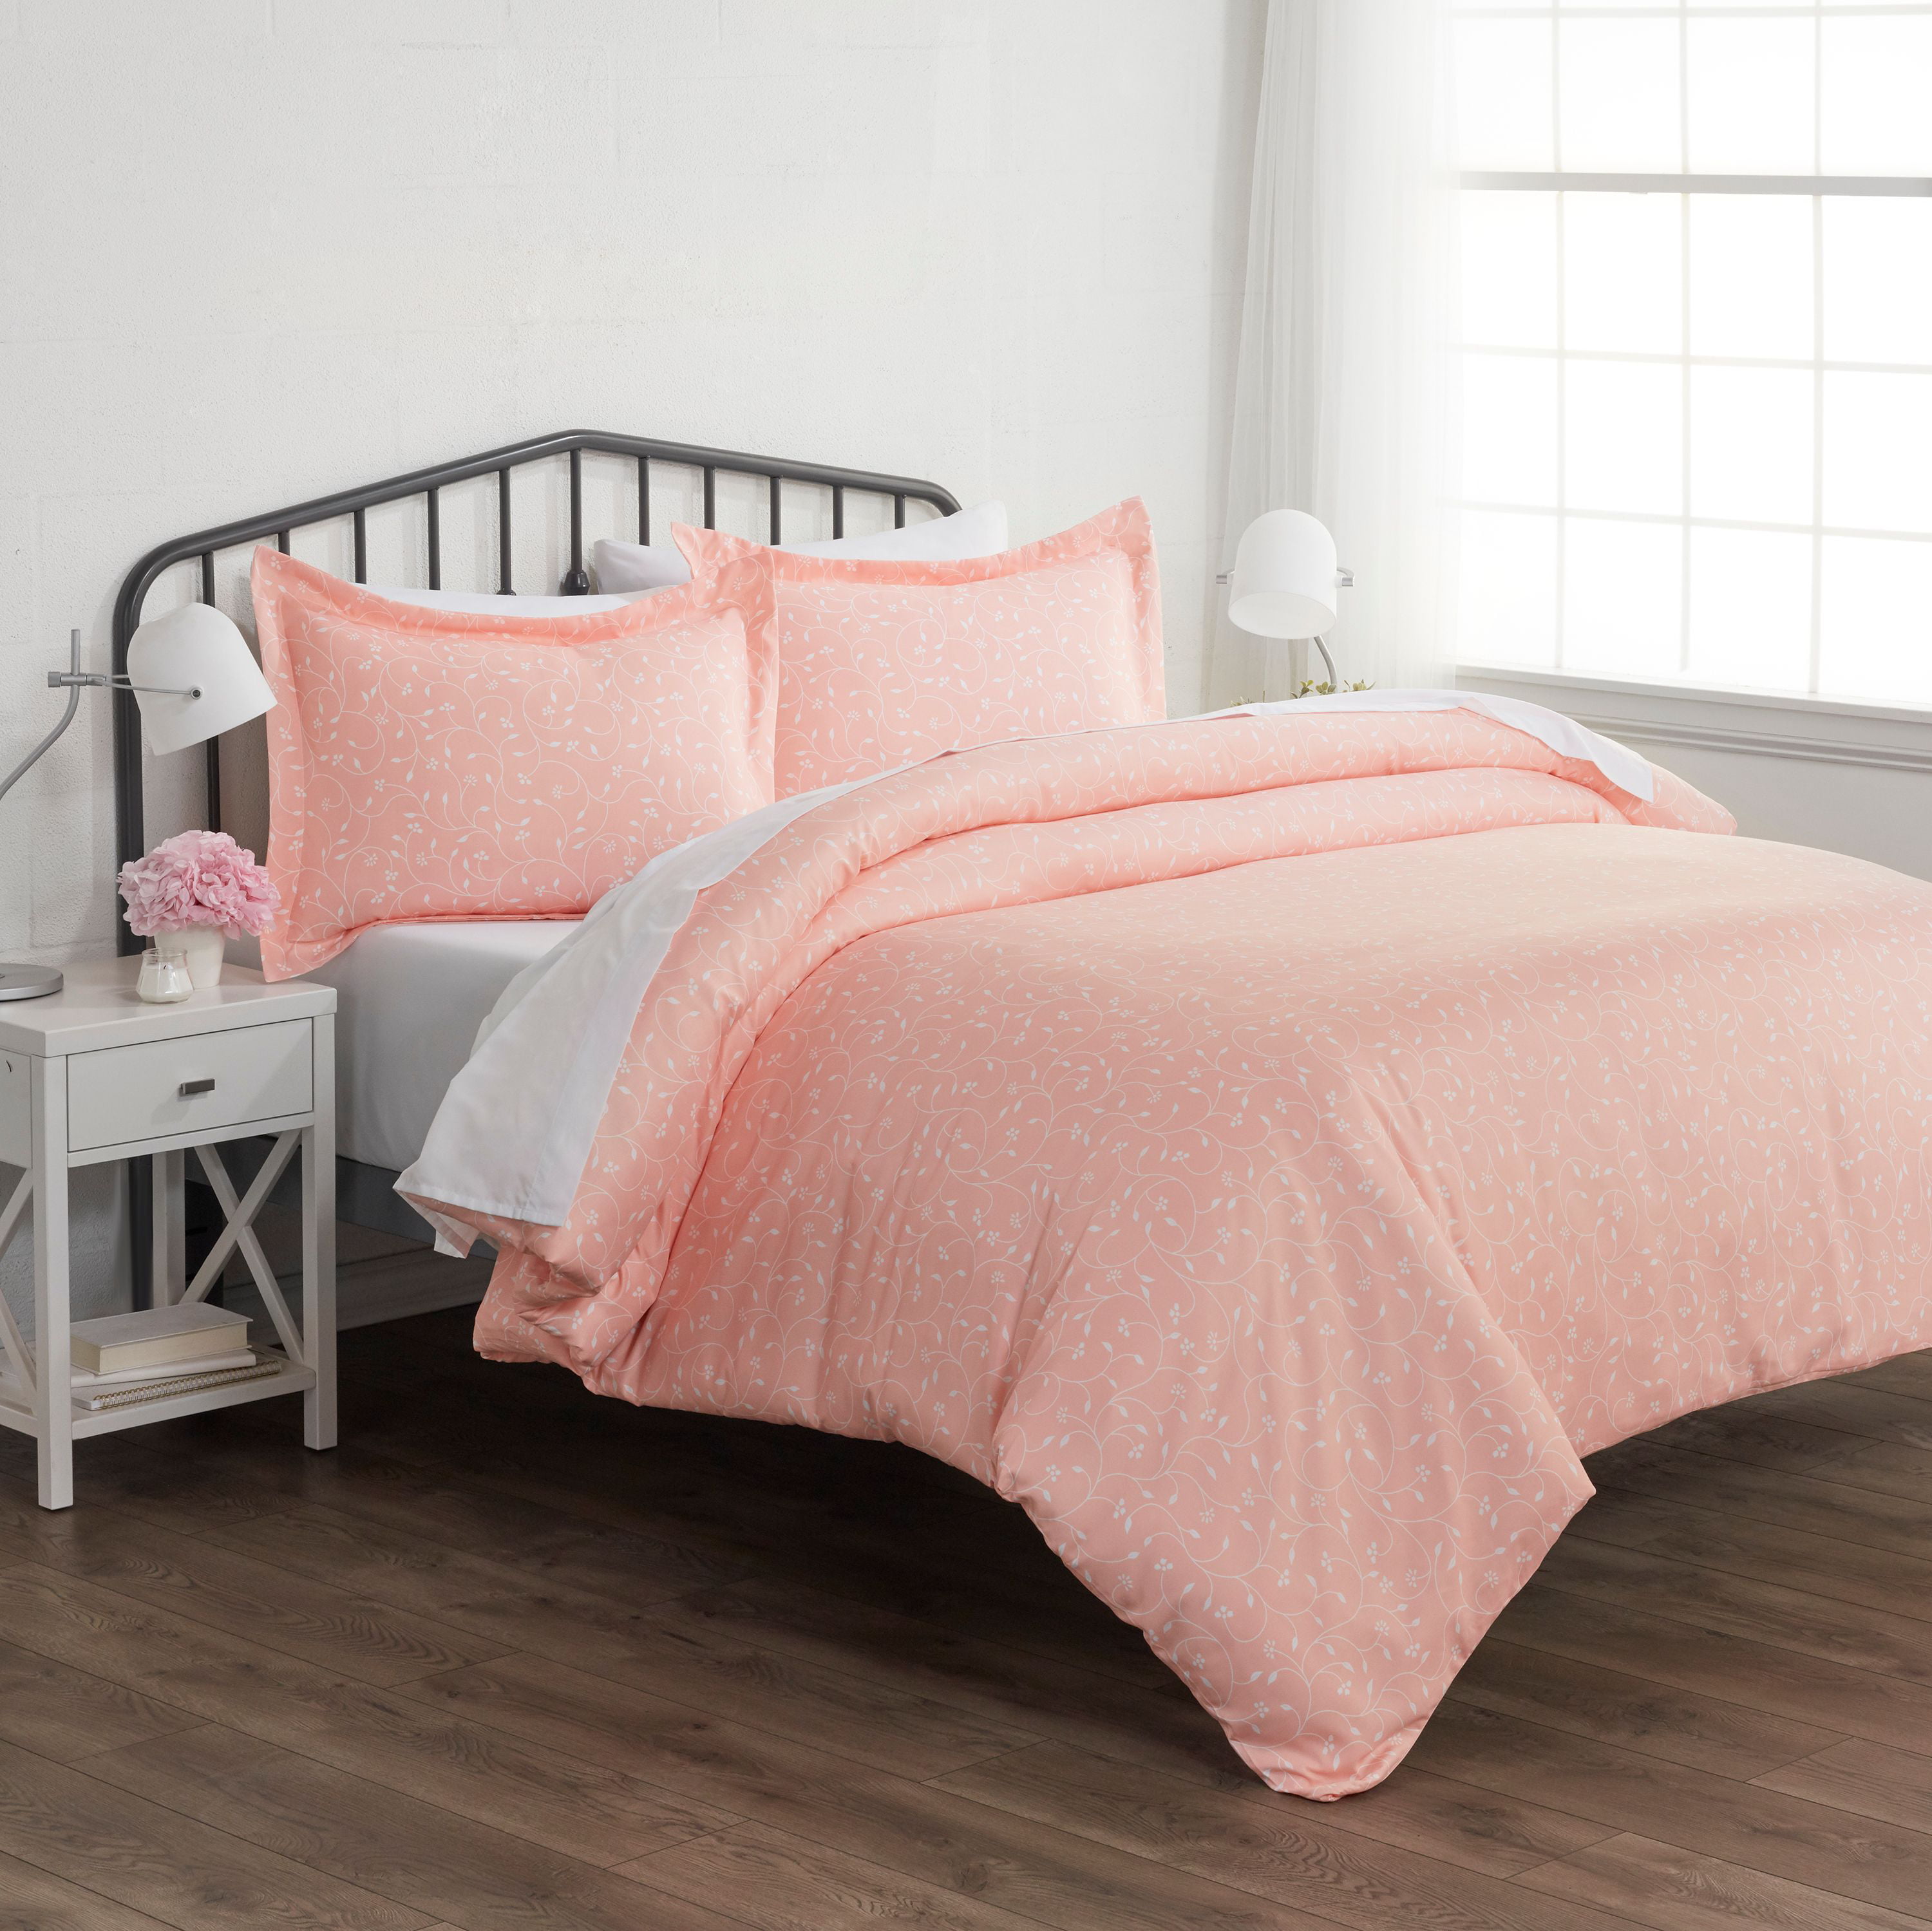 Pink Pink Buds Pattern 3 Piece Duvet Cover Set, King/Calking, by Noble ...